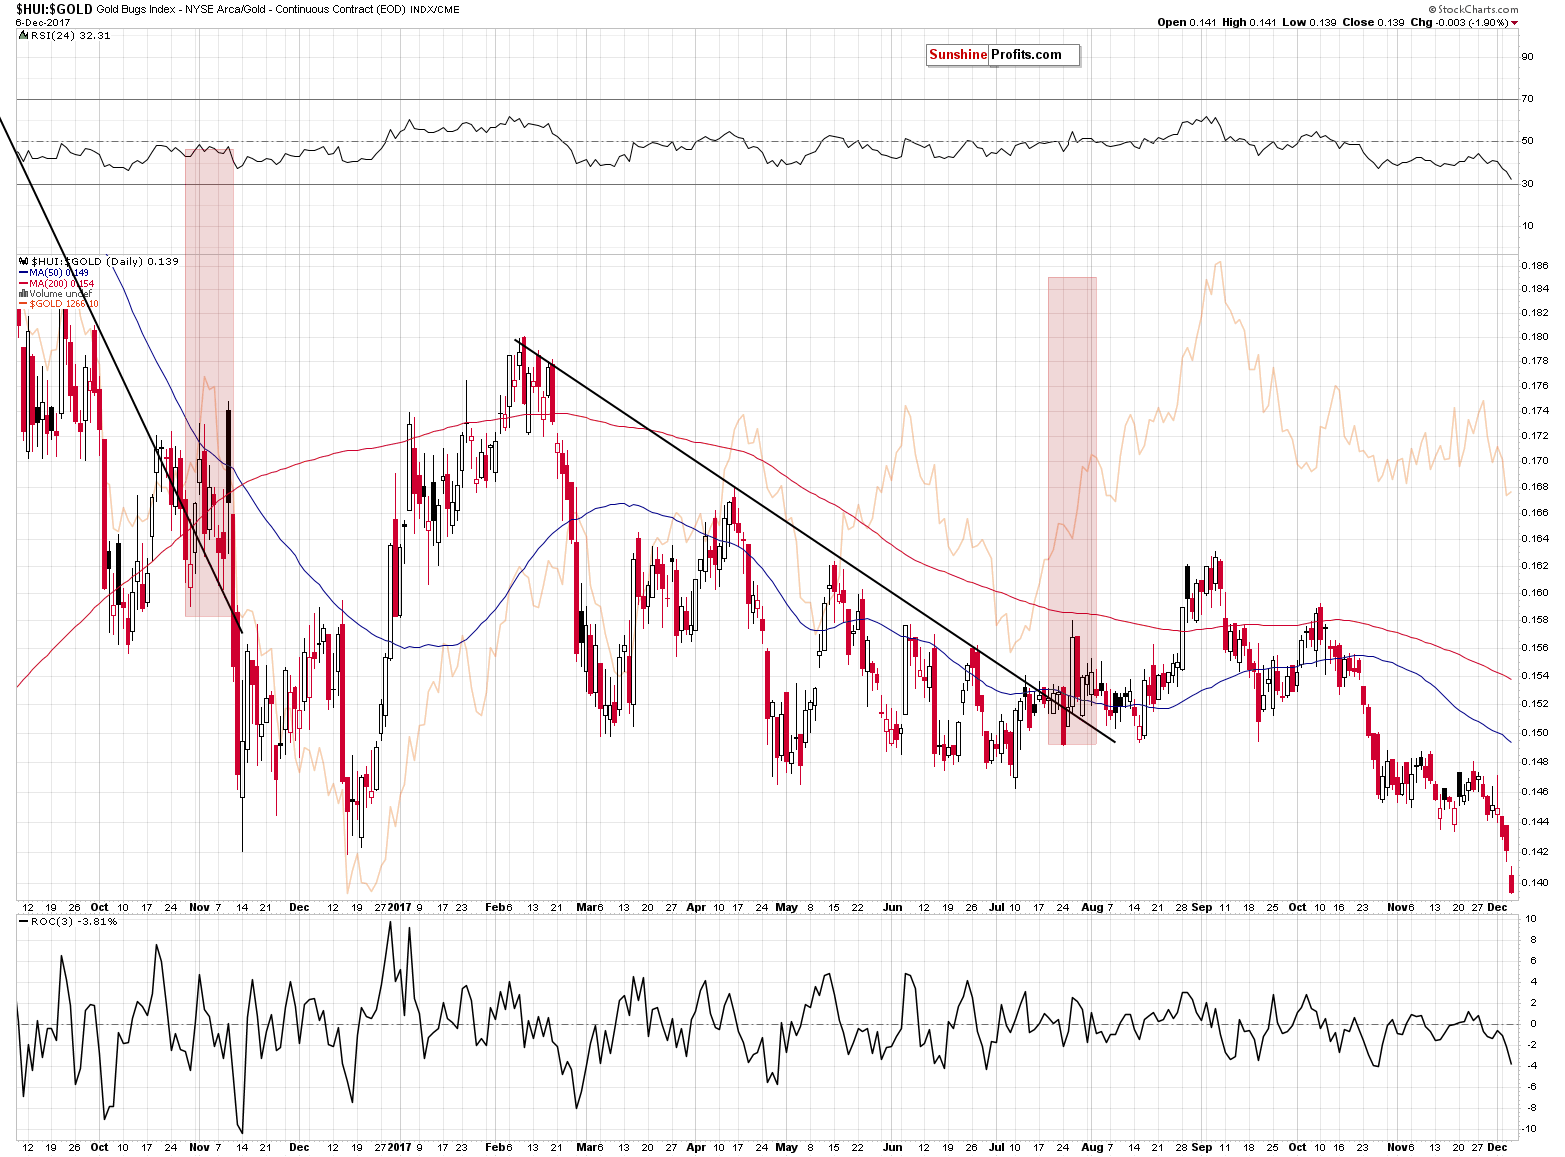 HUI:GOLD - Gold stocks to Gold ratio chart